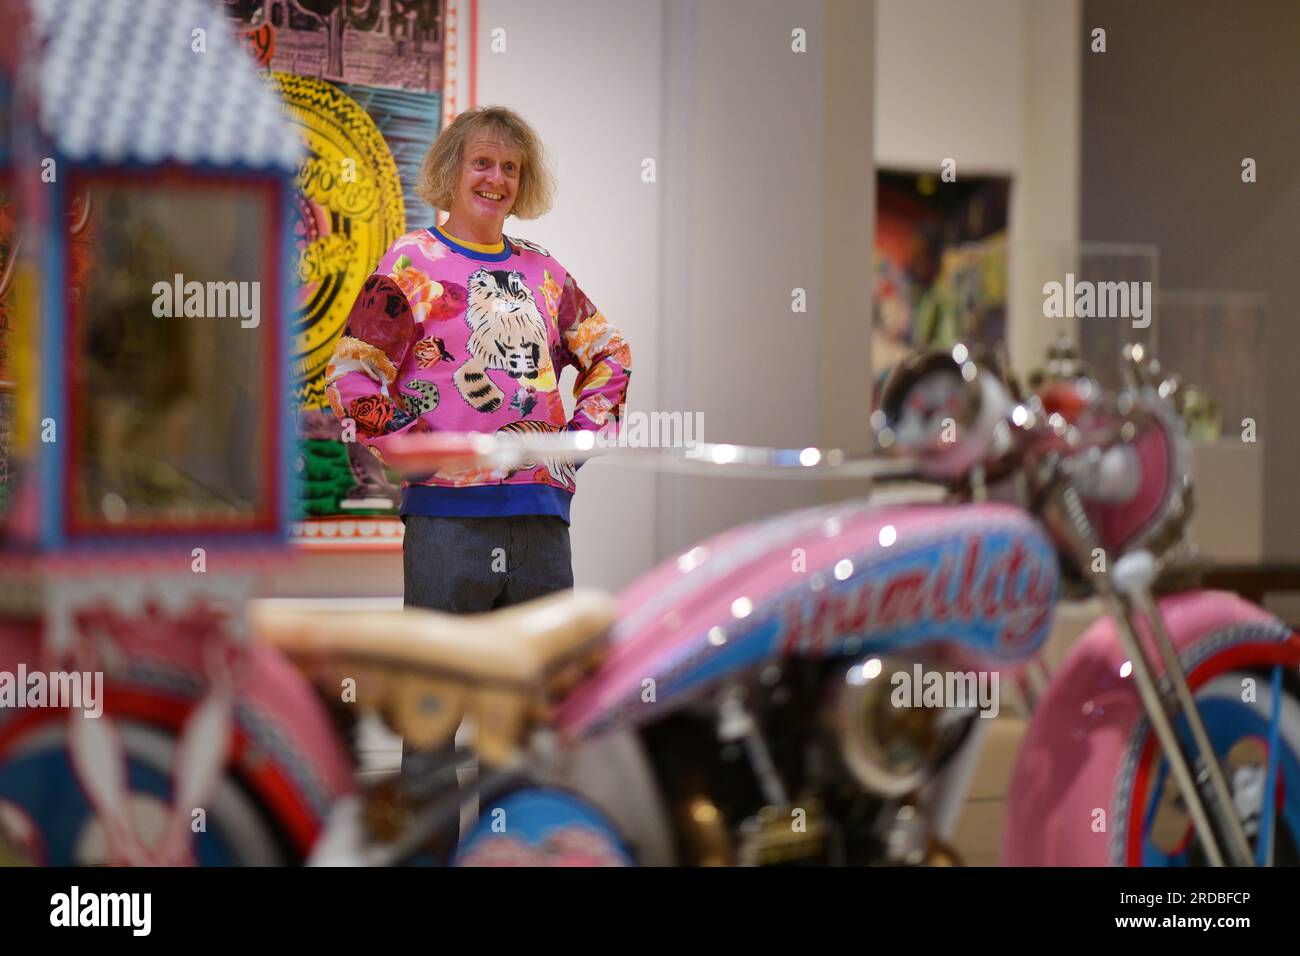 Edinburgh Scotland, UK 20 July 2023.  Sir Grayson Perry at the photo call for Grayson Perry: Smash Hits art exhibition at the National Galleries of Scotland, Royal Scottish Academy, The Mound.   credit sst/alamy live news Stock Photo